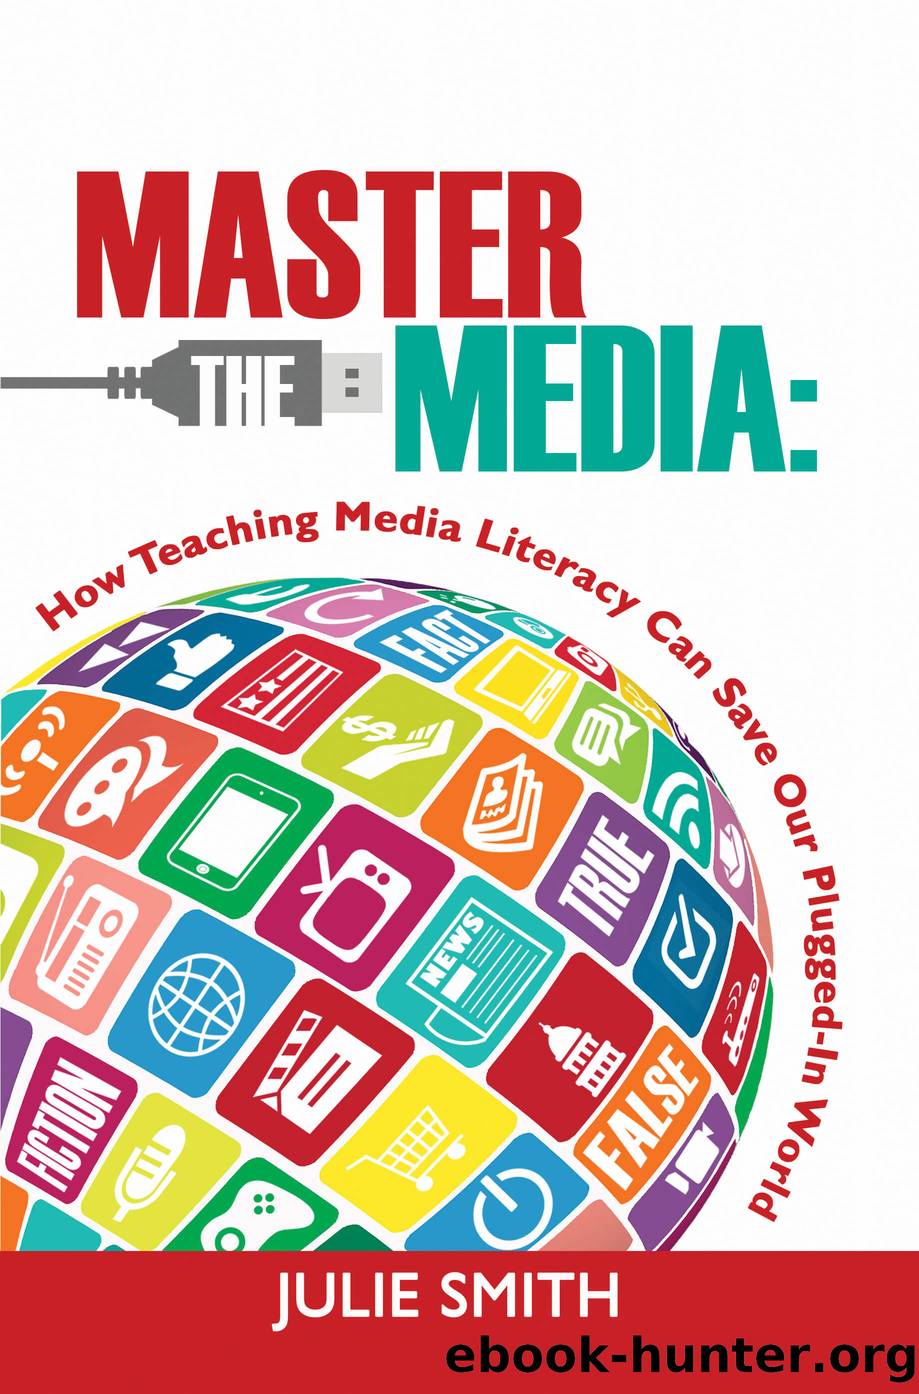 Master the Media by Julie Smith